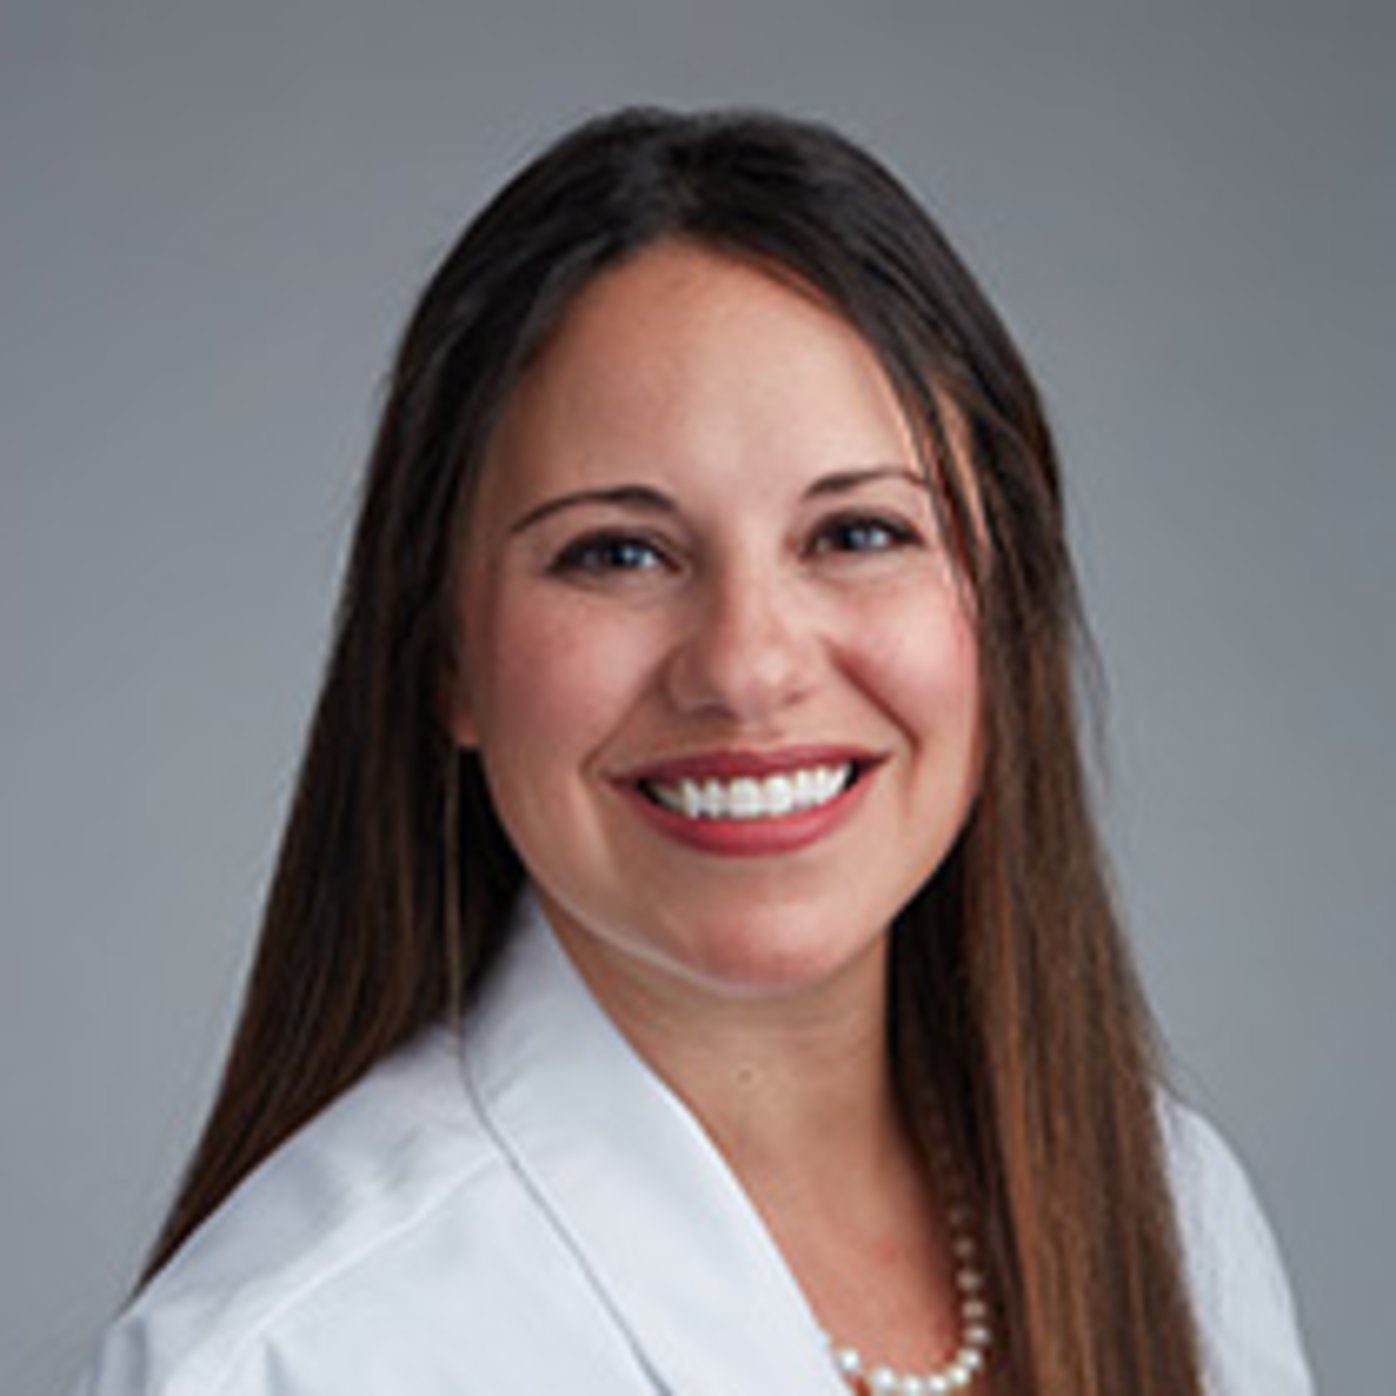 Dr. Noran Barry of Sharp HealthCare